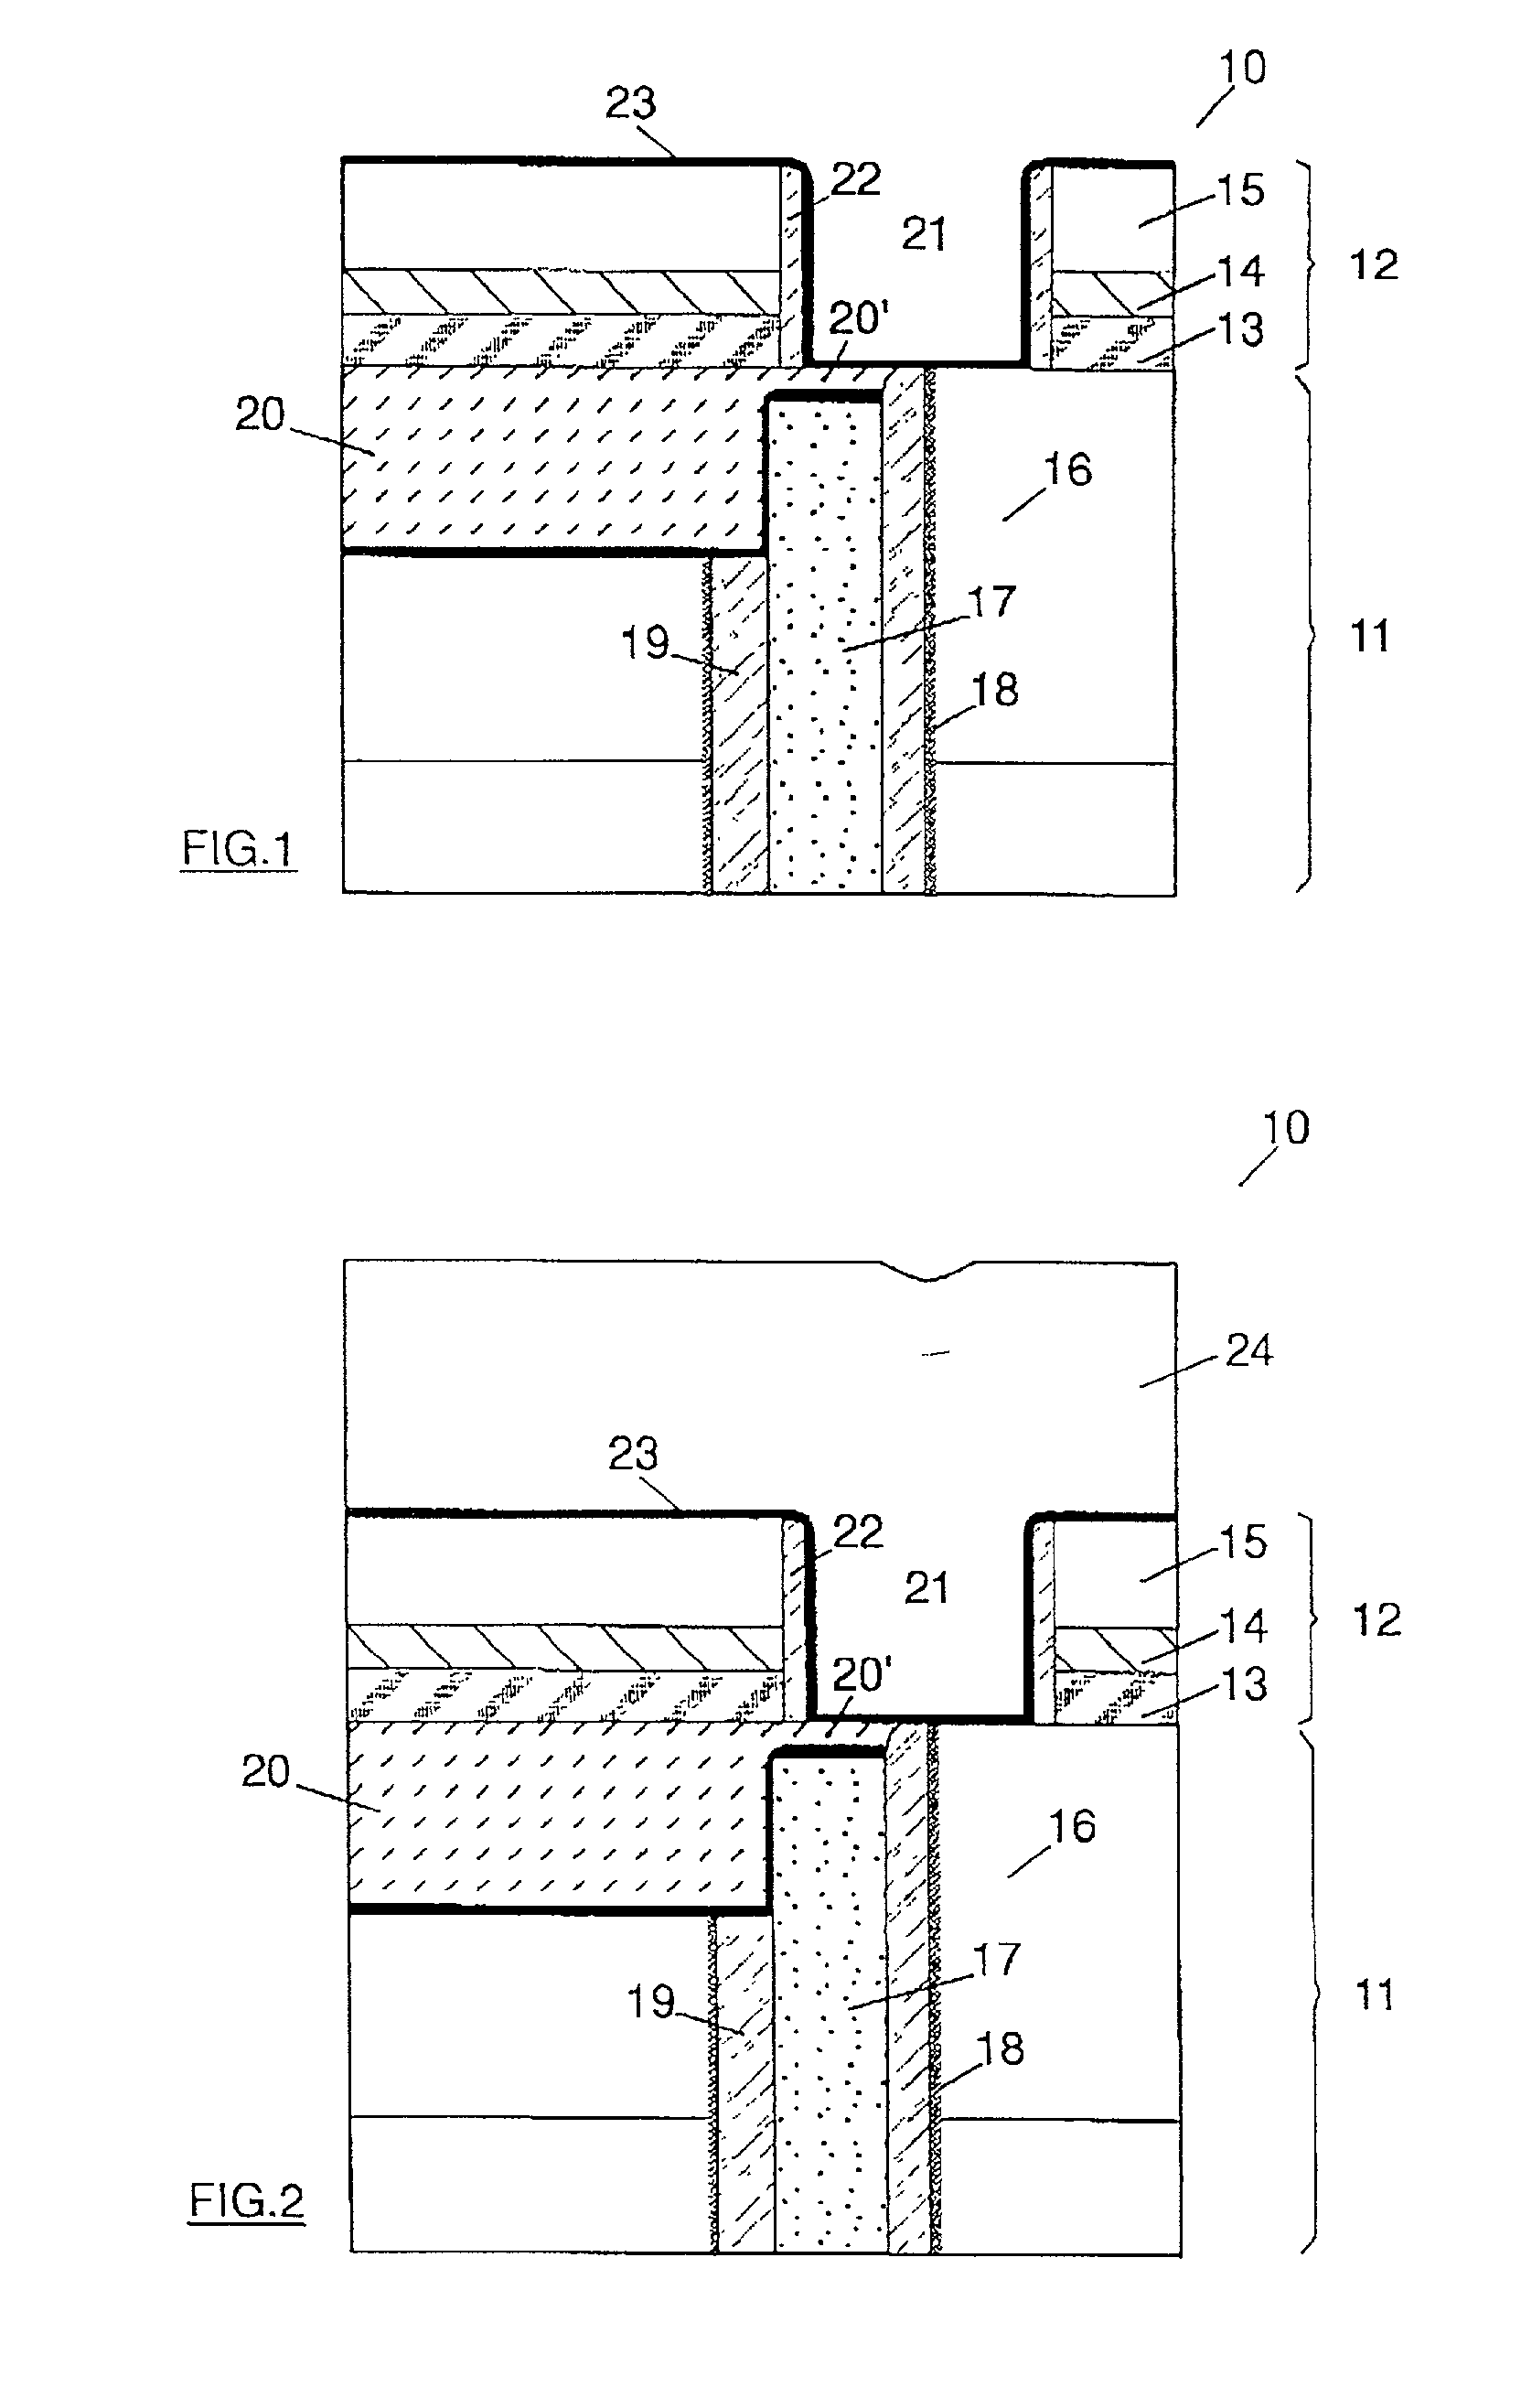 Method of plasma etching doped polysilicon layers with uniform etch rates